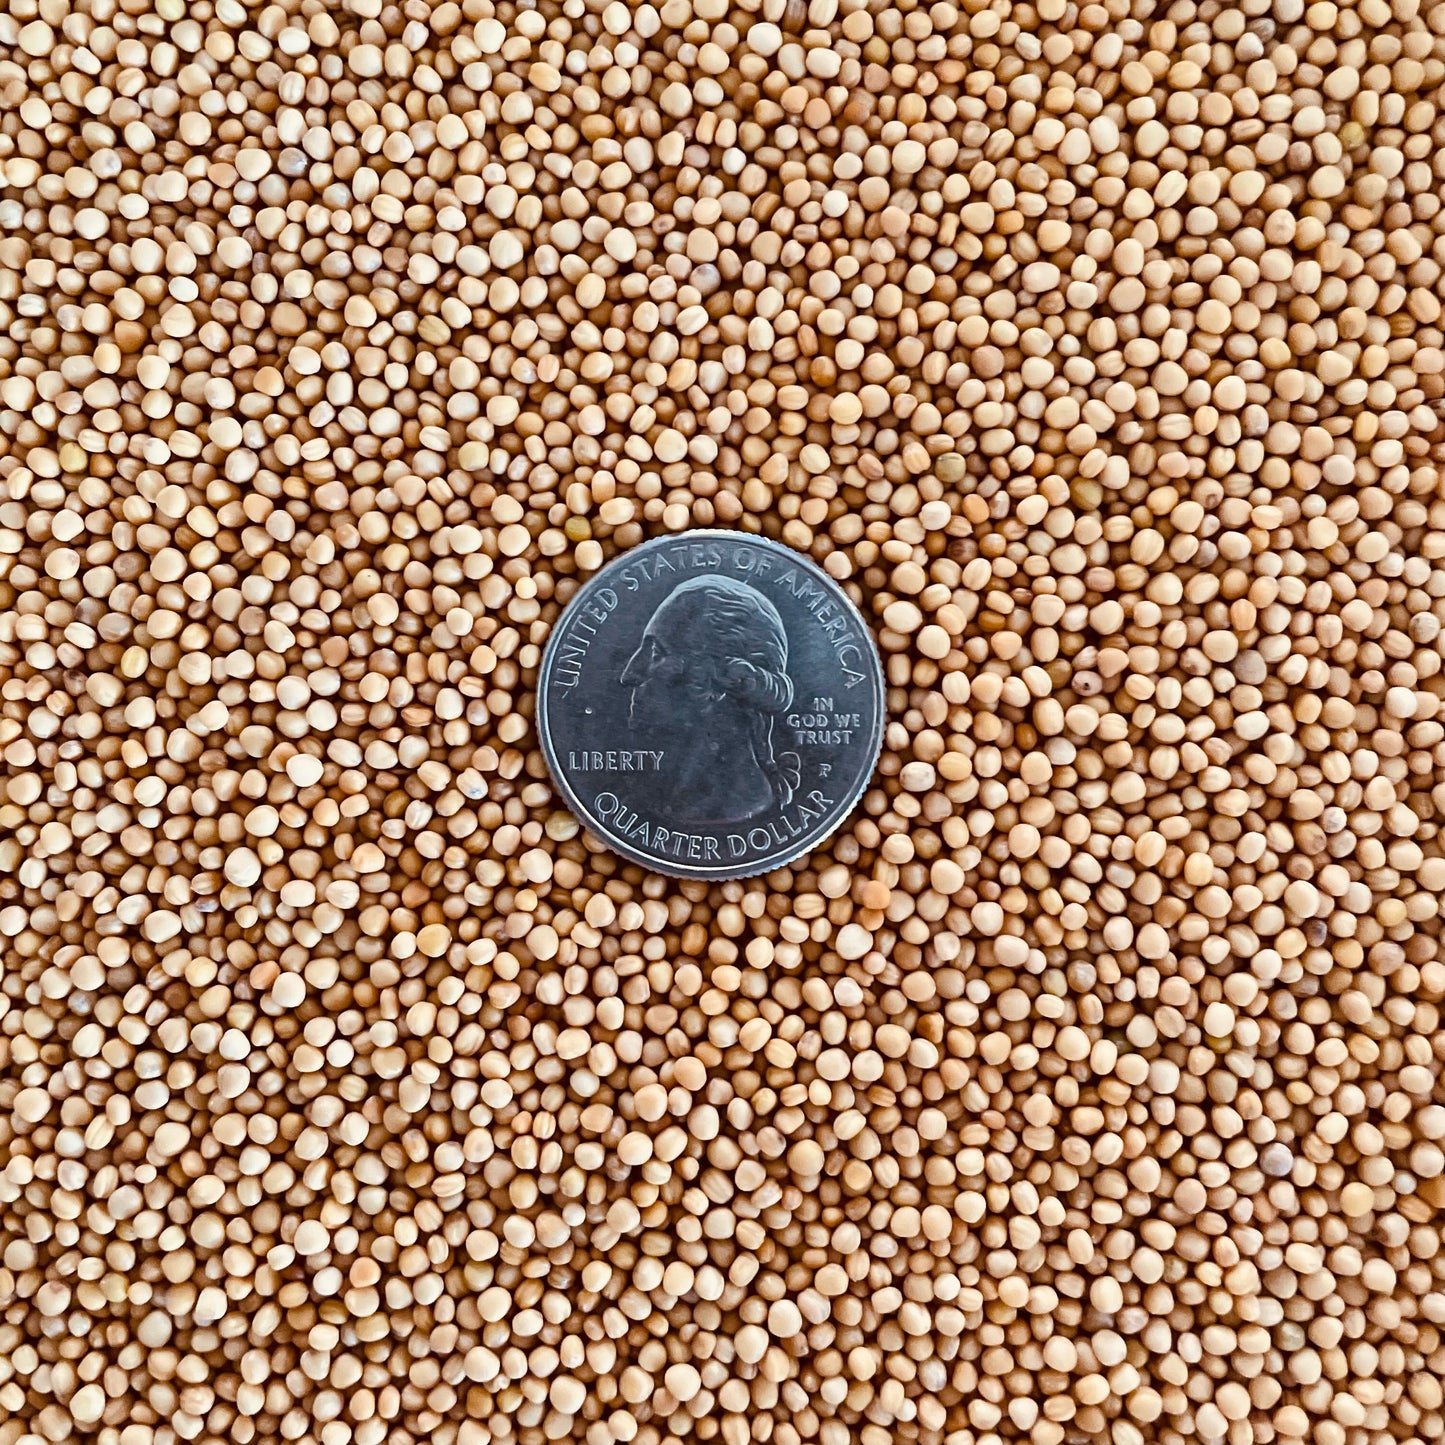 Mustard Seed Star Cores 1 lb